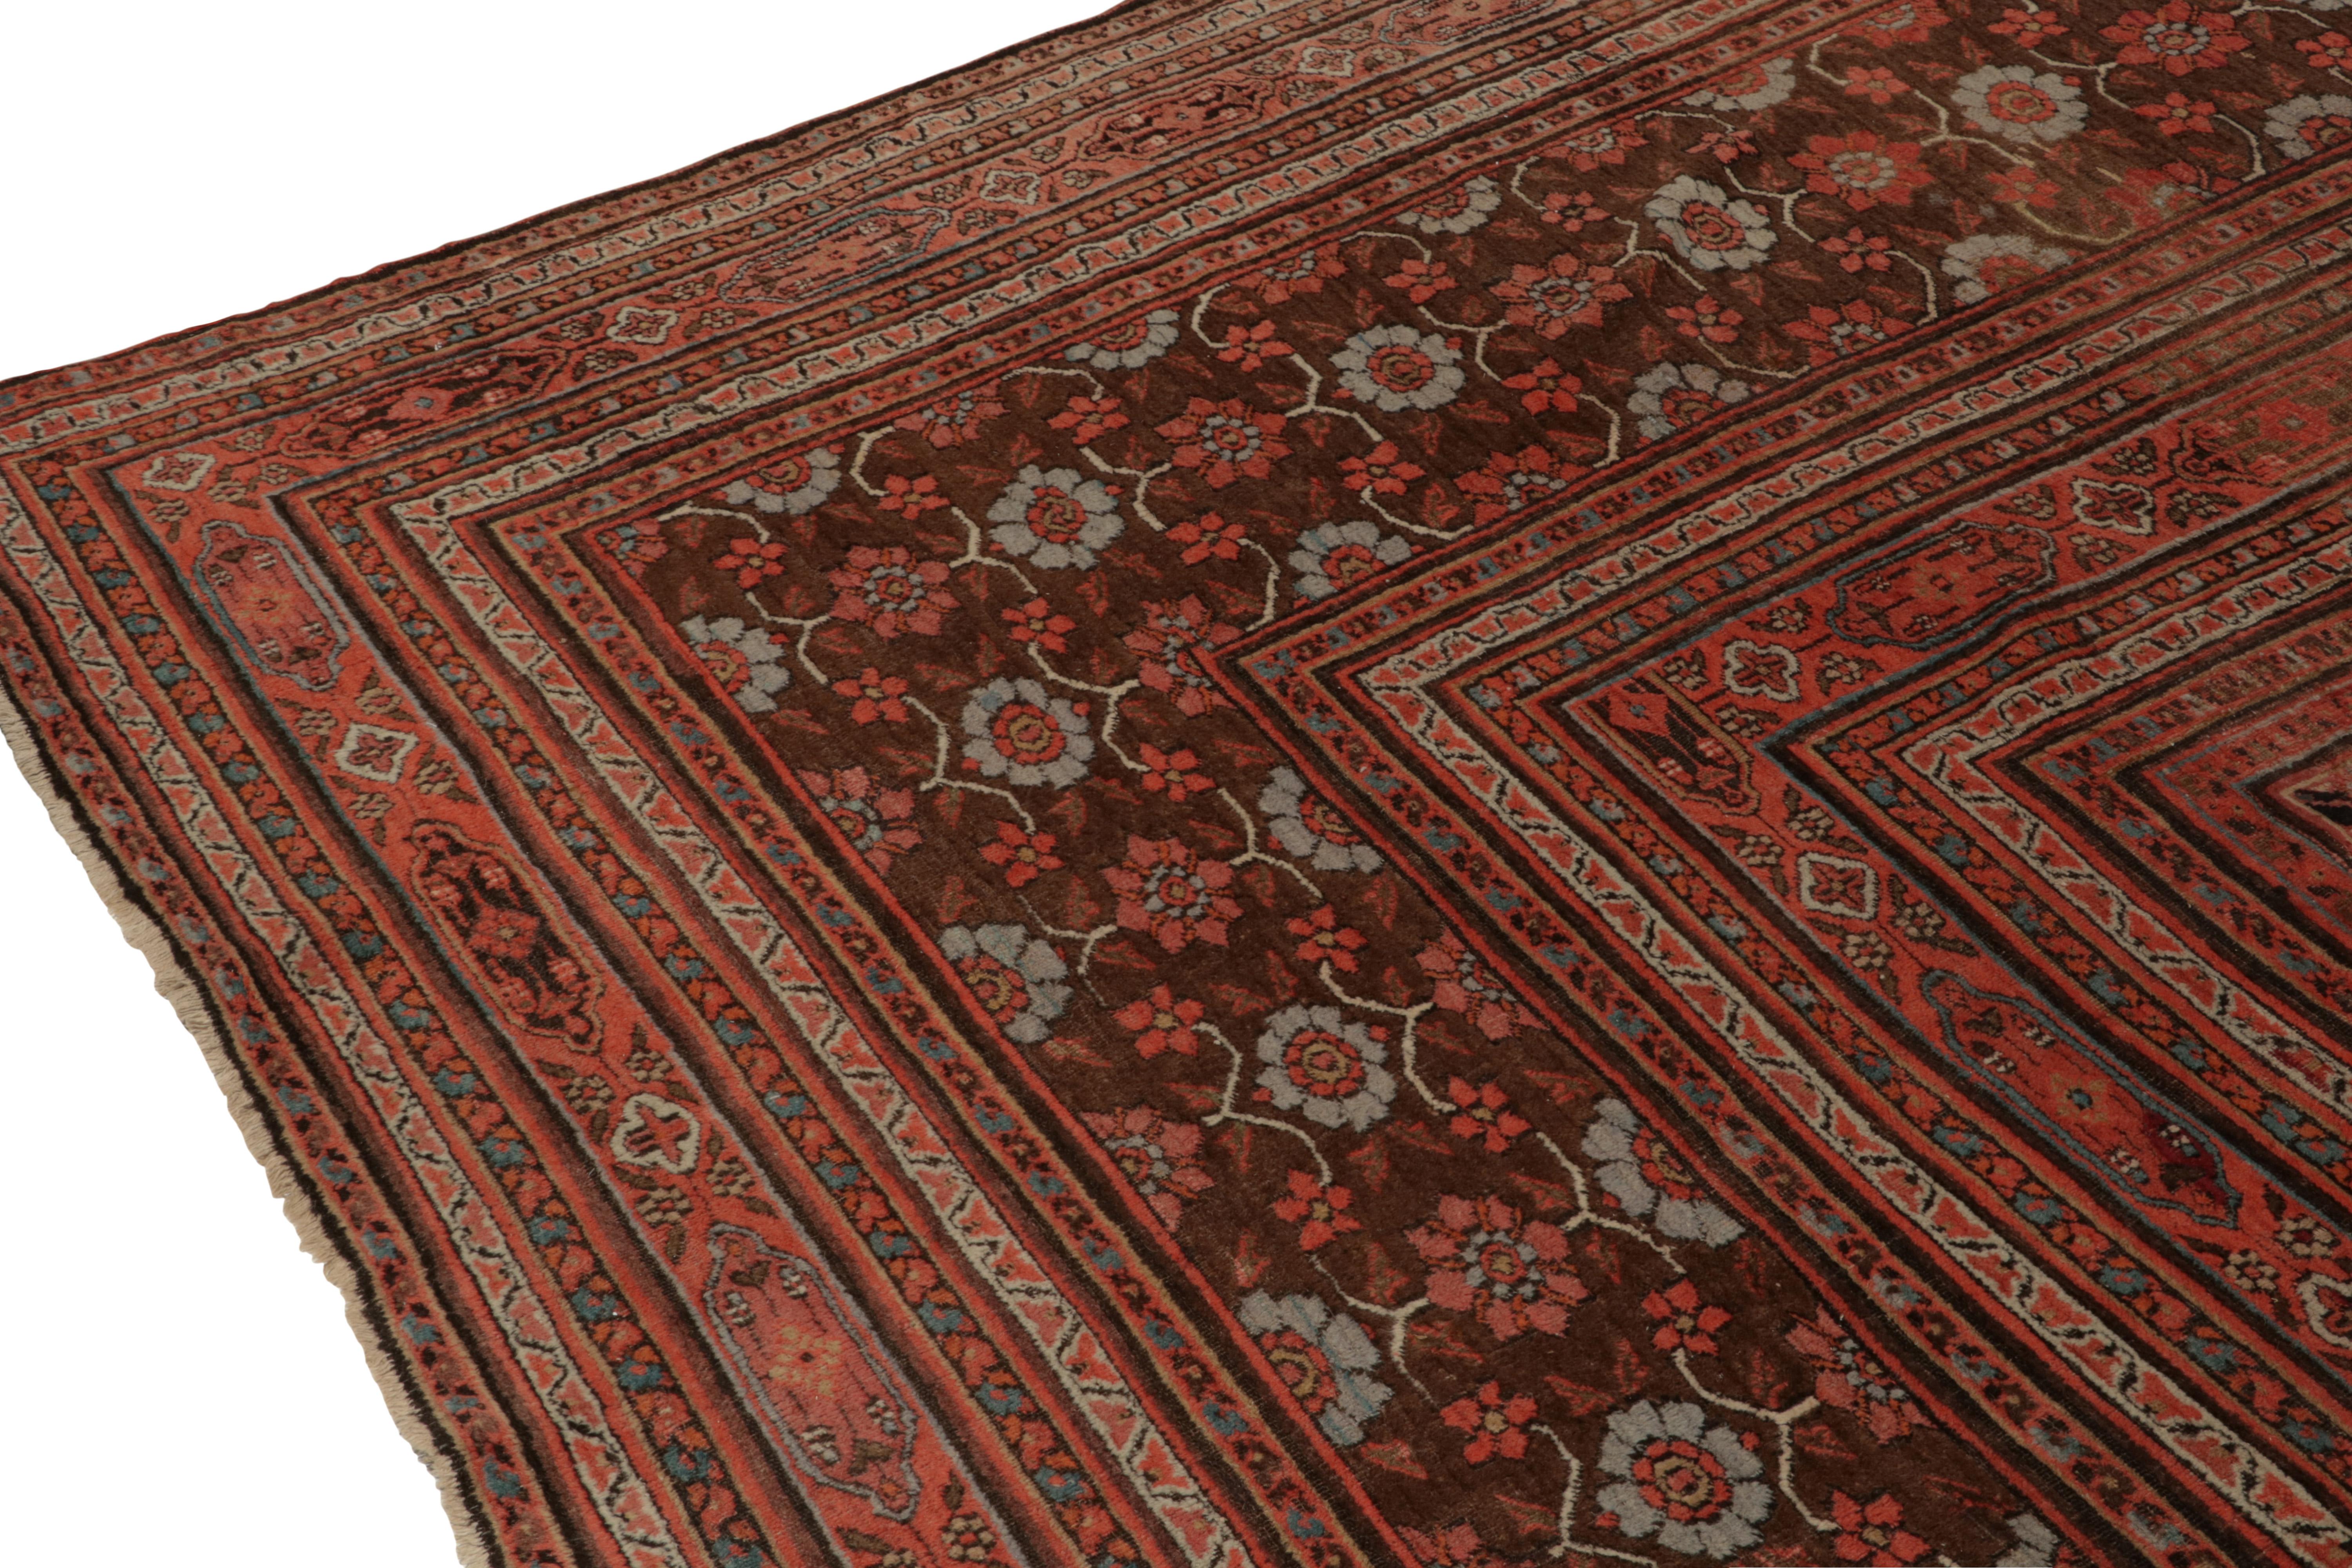 Antique Doroksh Rug in Red Brown & Blue Herati Floral Pattern by Rug Kilim In Good Condition For Sale In Long Island City, NY